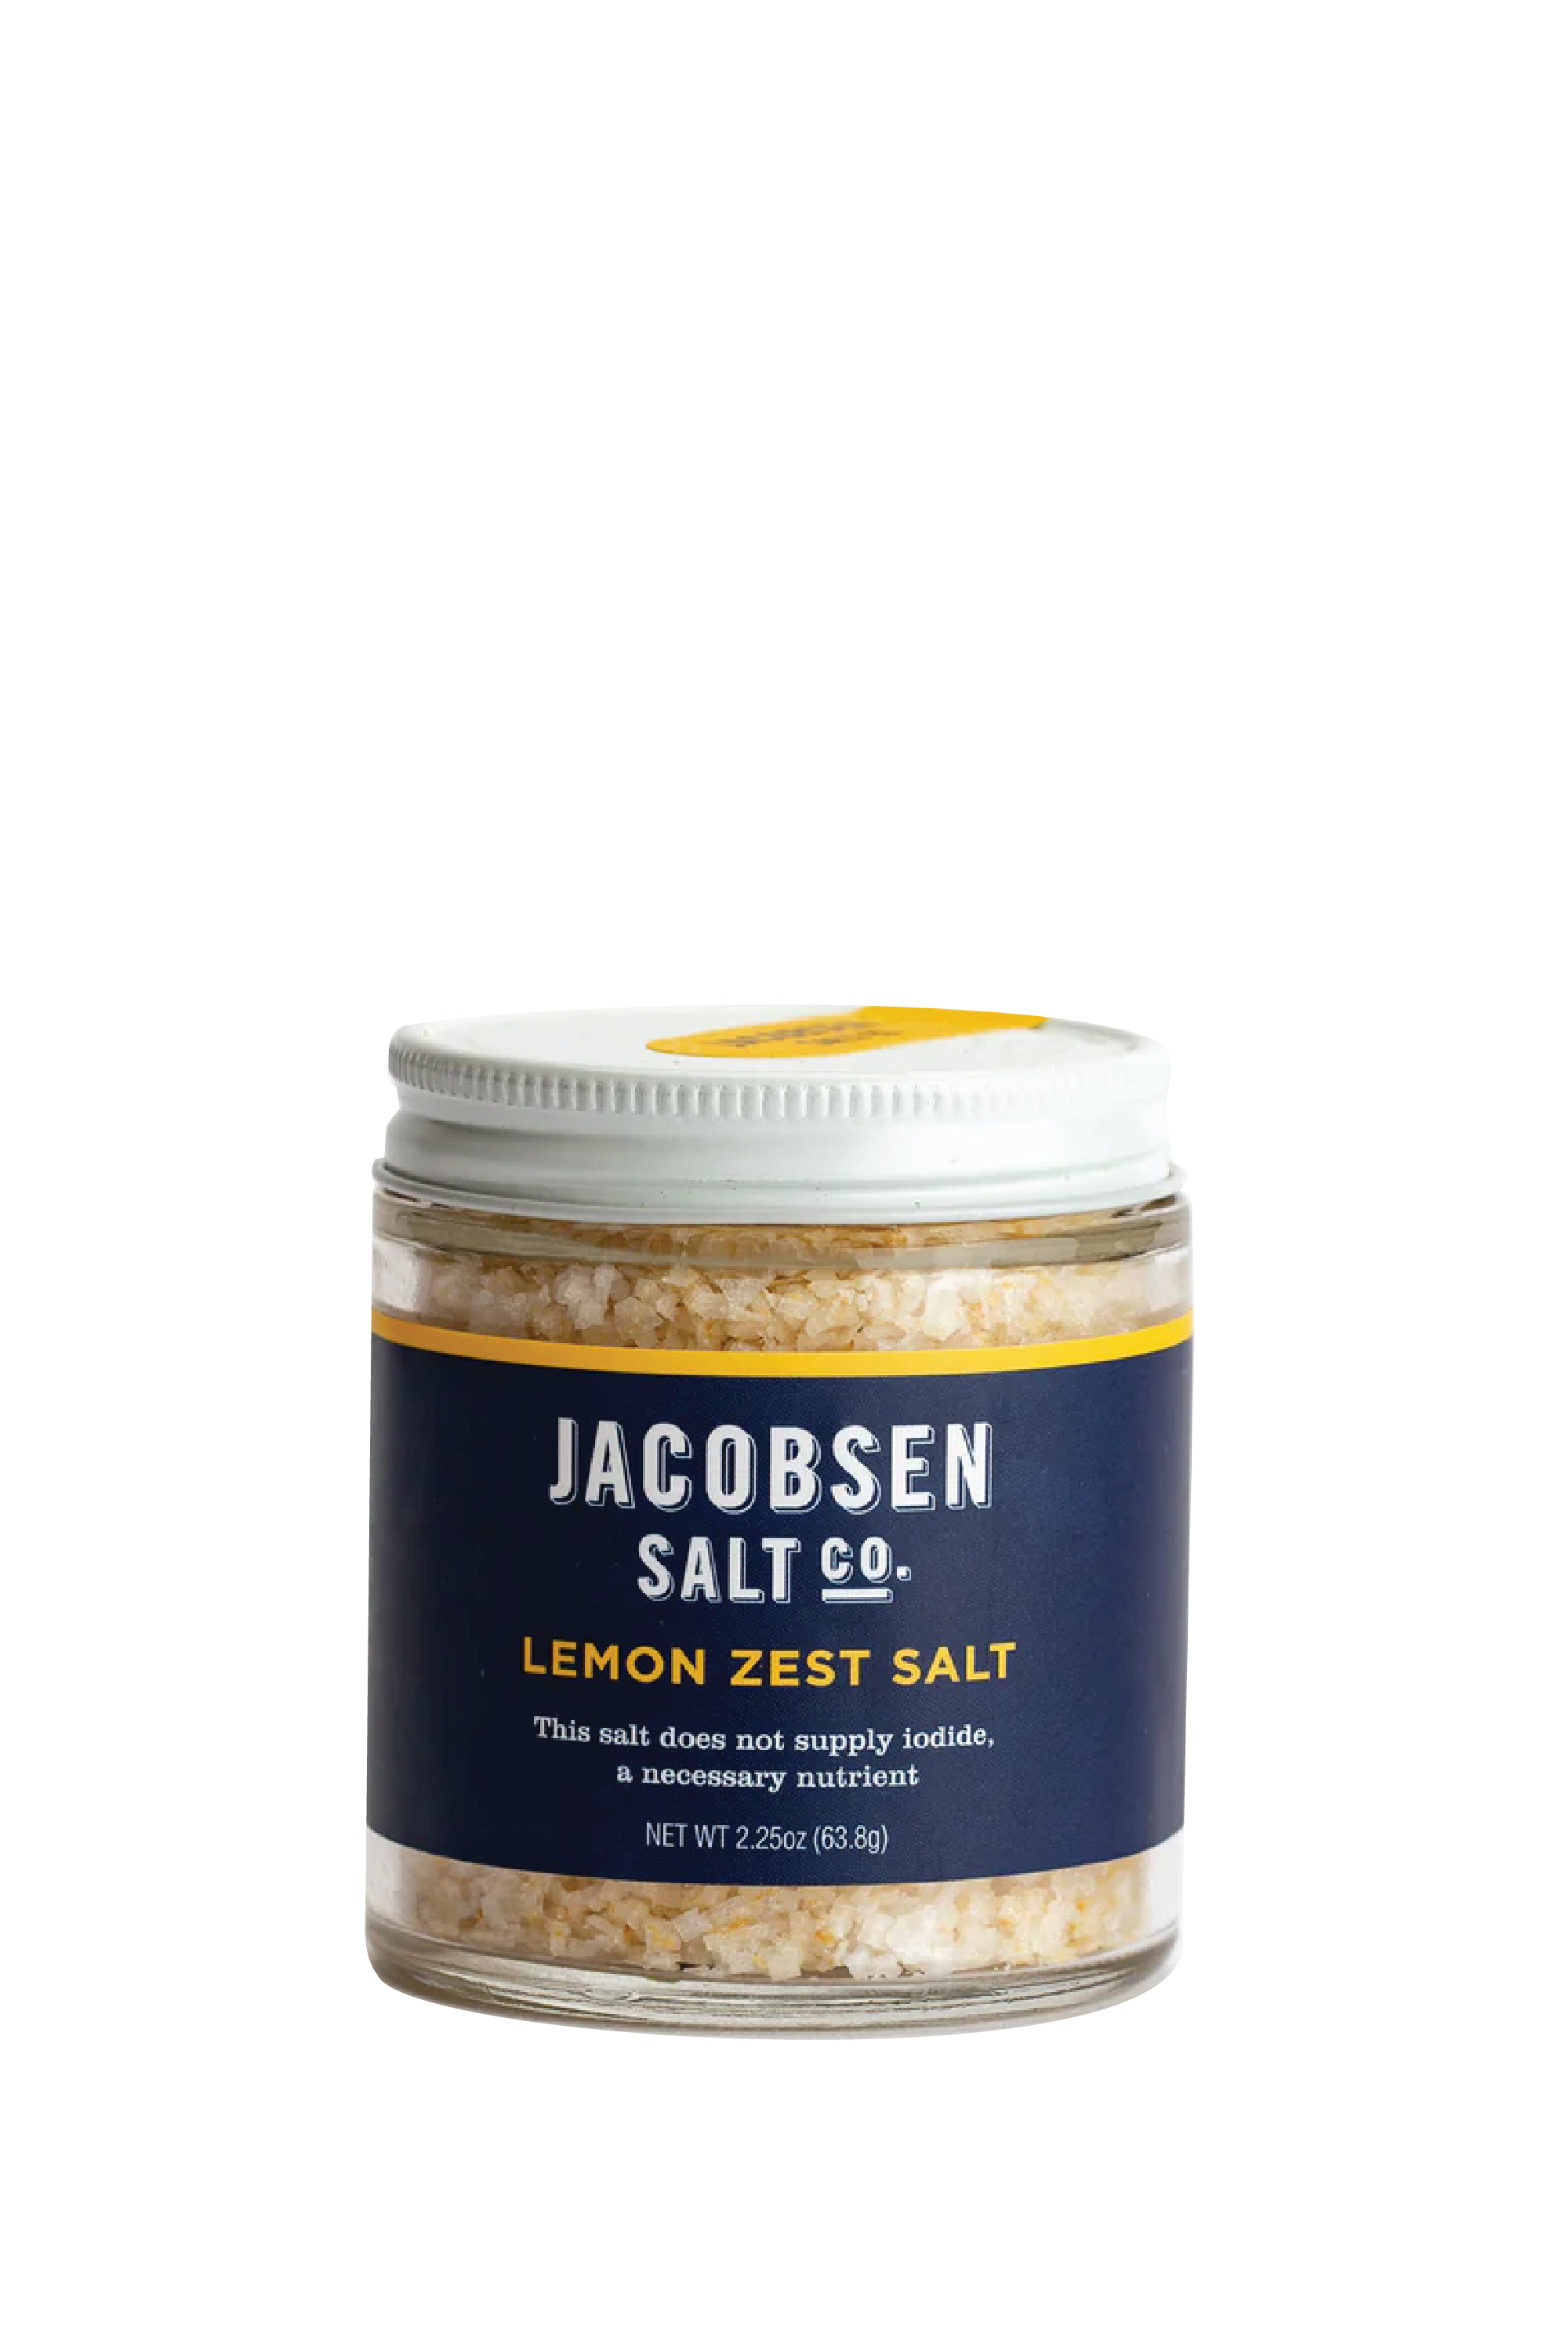 A Photo Of Lemon Zest Salt in a glass jar with a blue label. White Background.